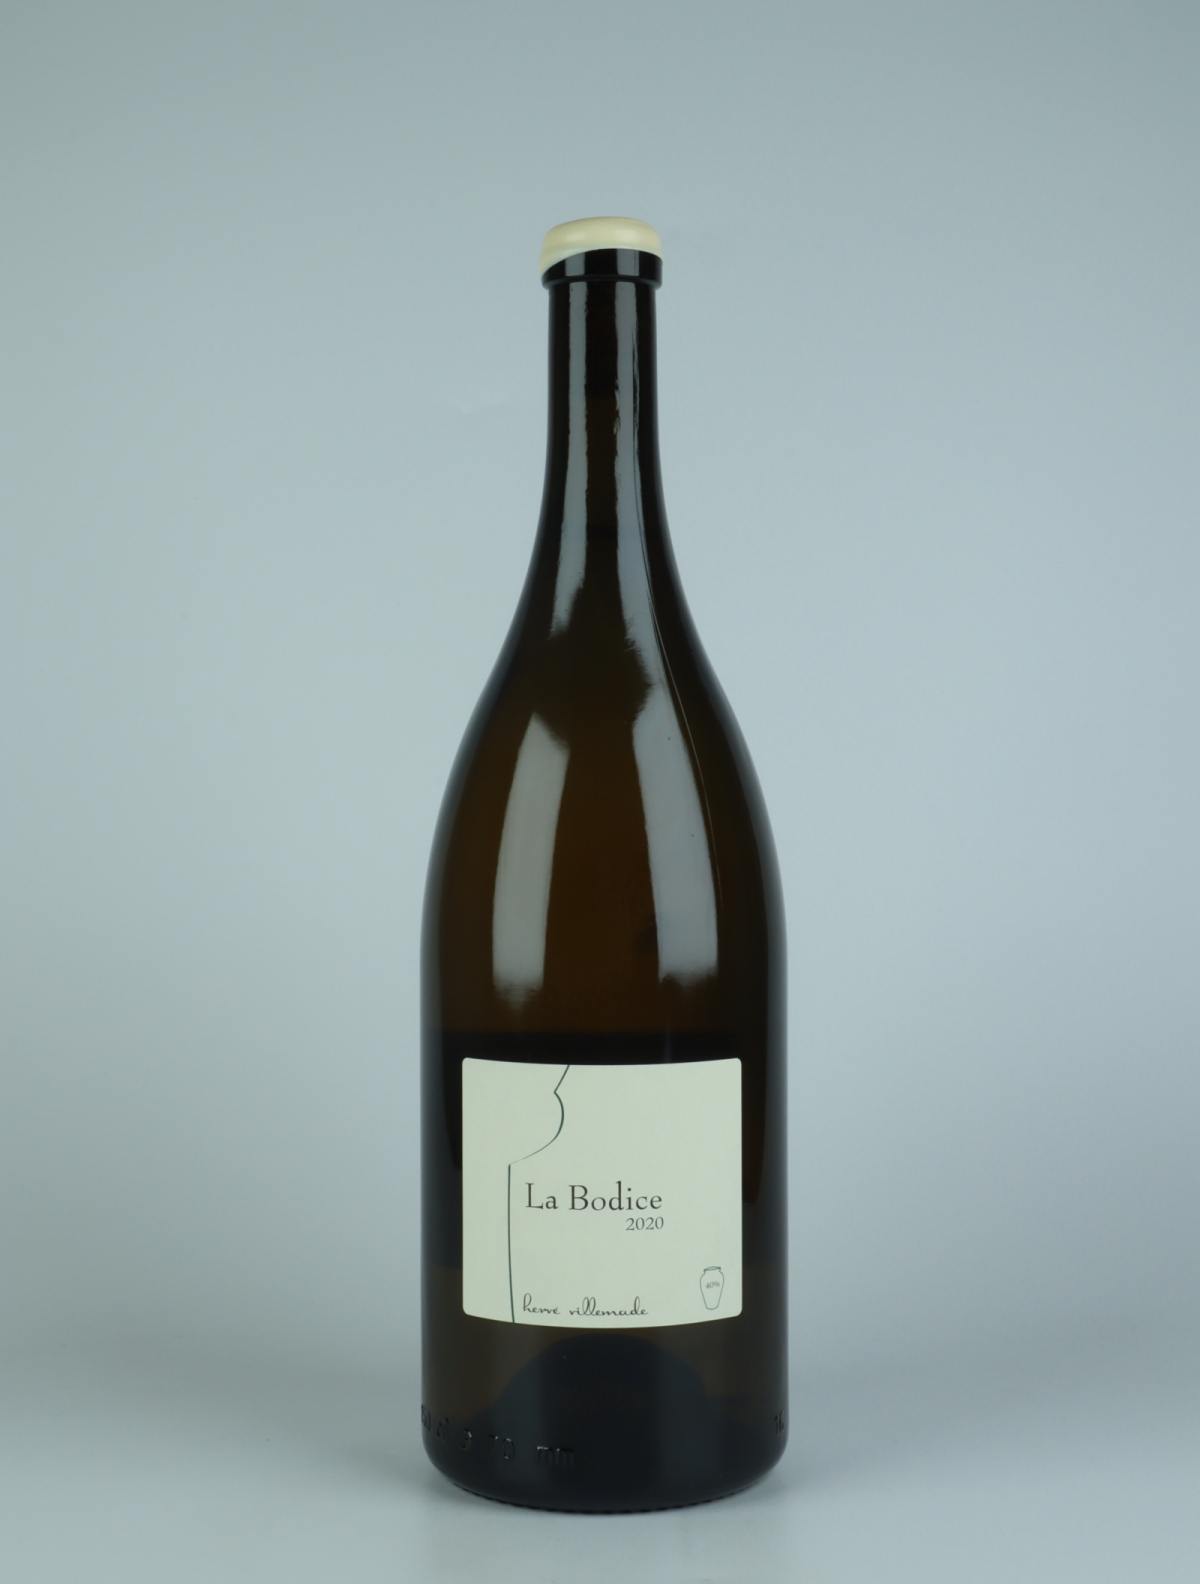 A bottle 2020 Cheverny Blanc - La Bodice White wine from Hervé Villemade, Loire in France